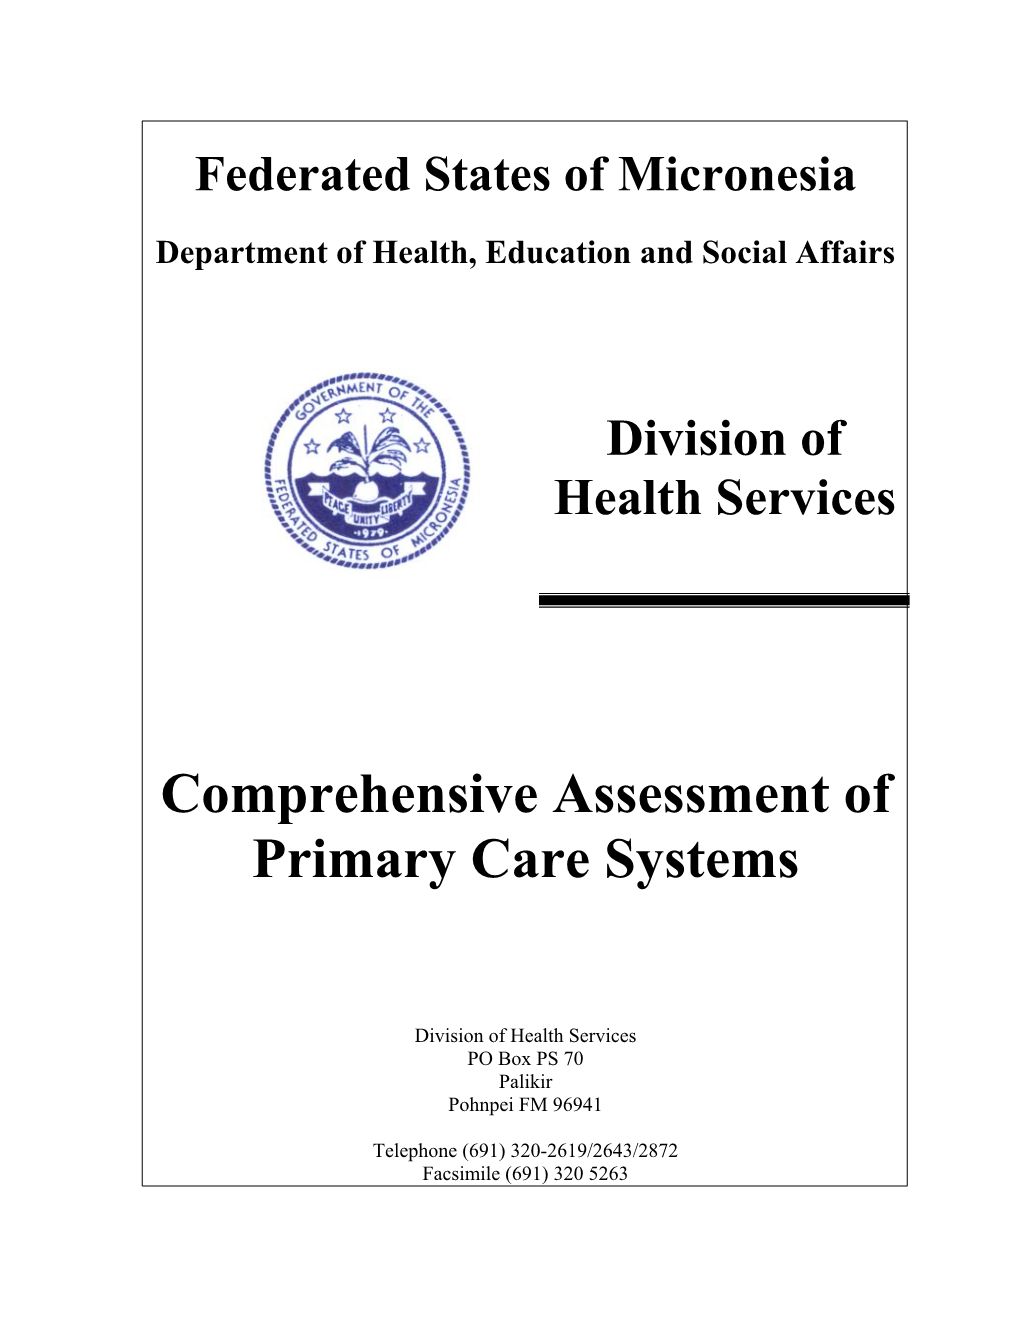 Comprehensive Assessment of Primary Care Systems